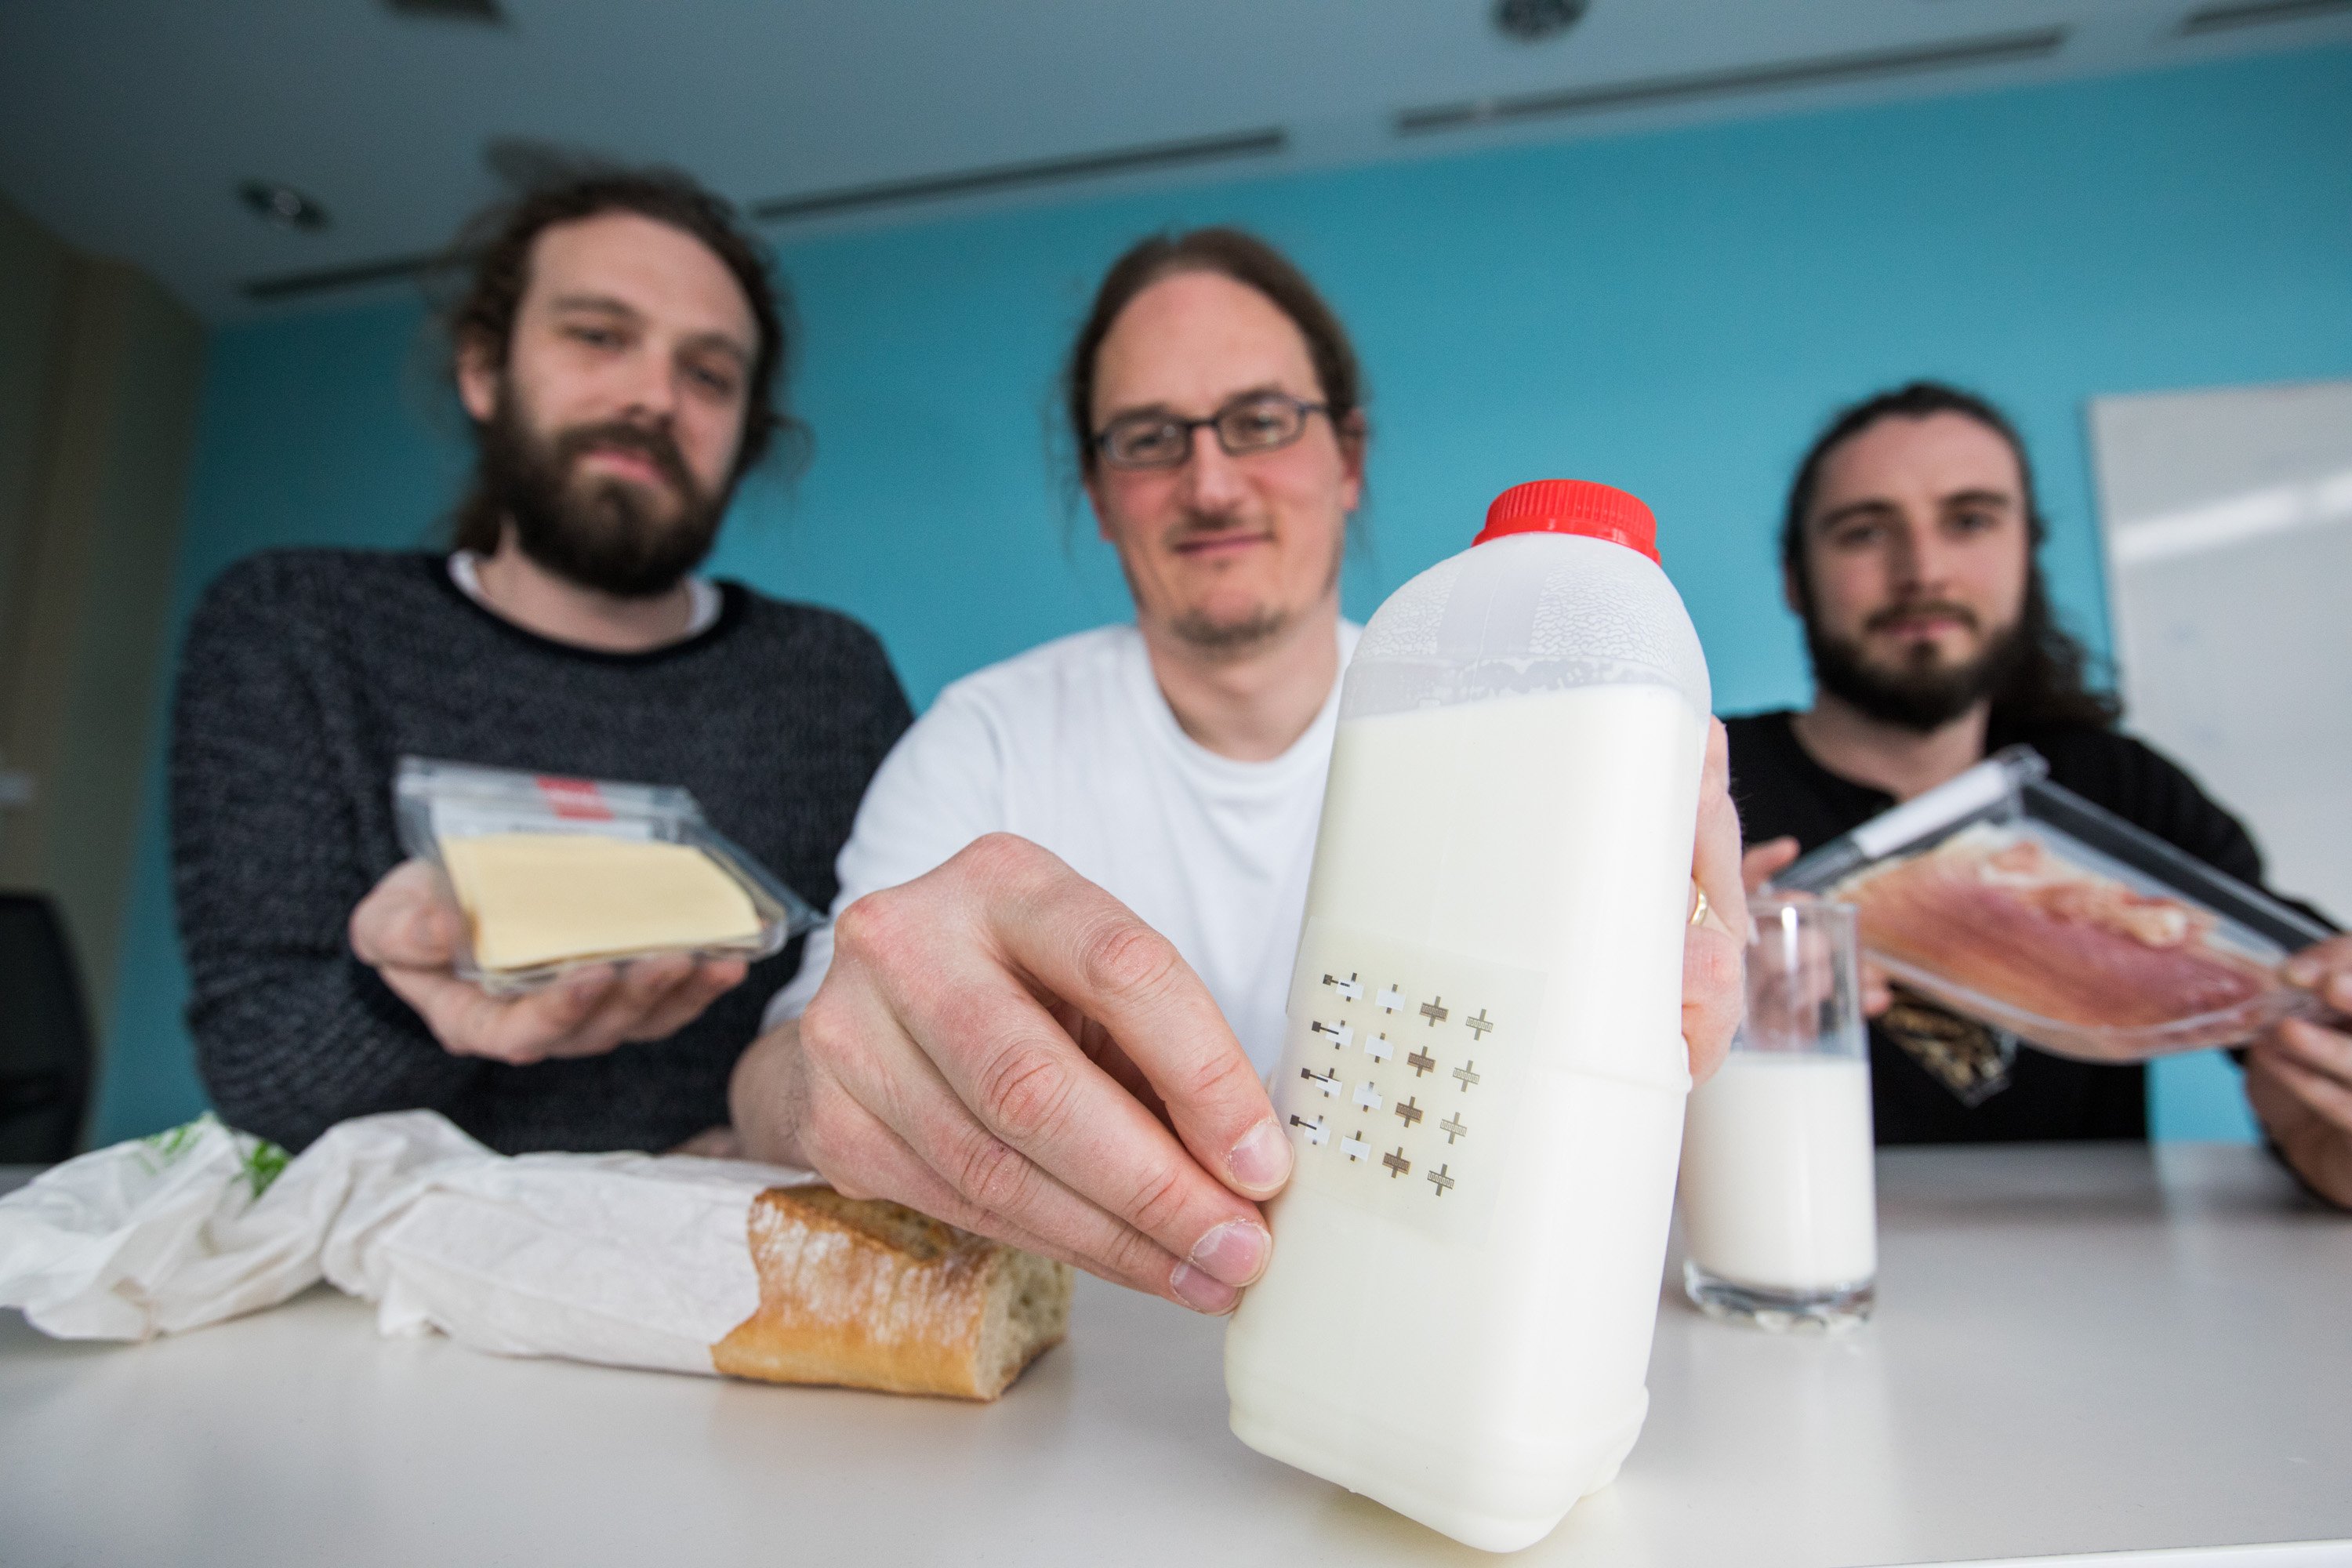 Leading innovation could transform everyday products (like your milk carton) into intelligent smart devices. Image credit: SFI.ie